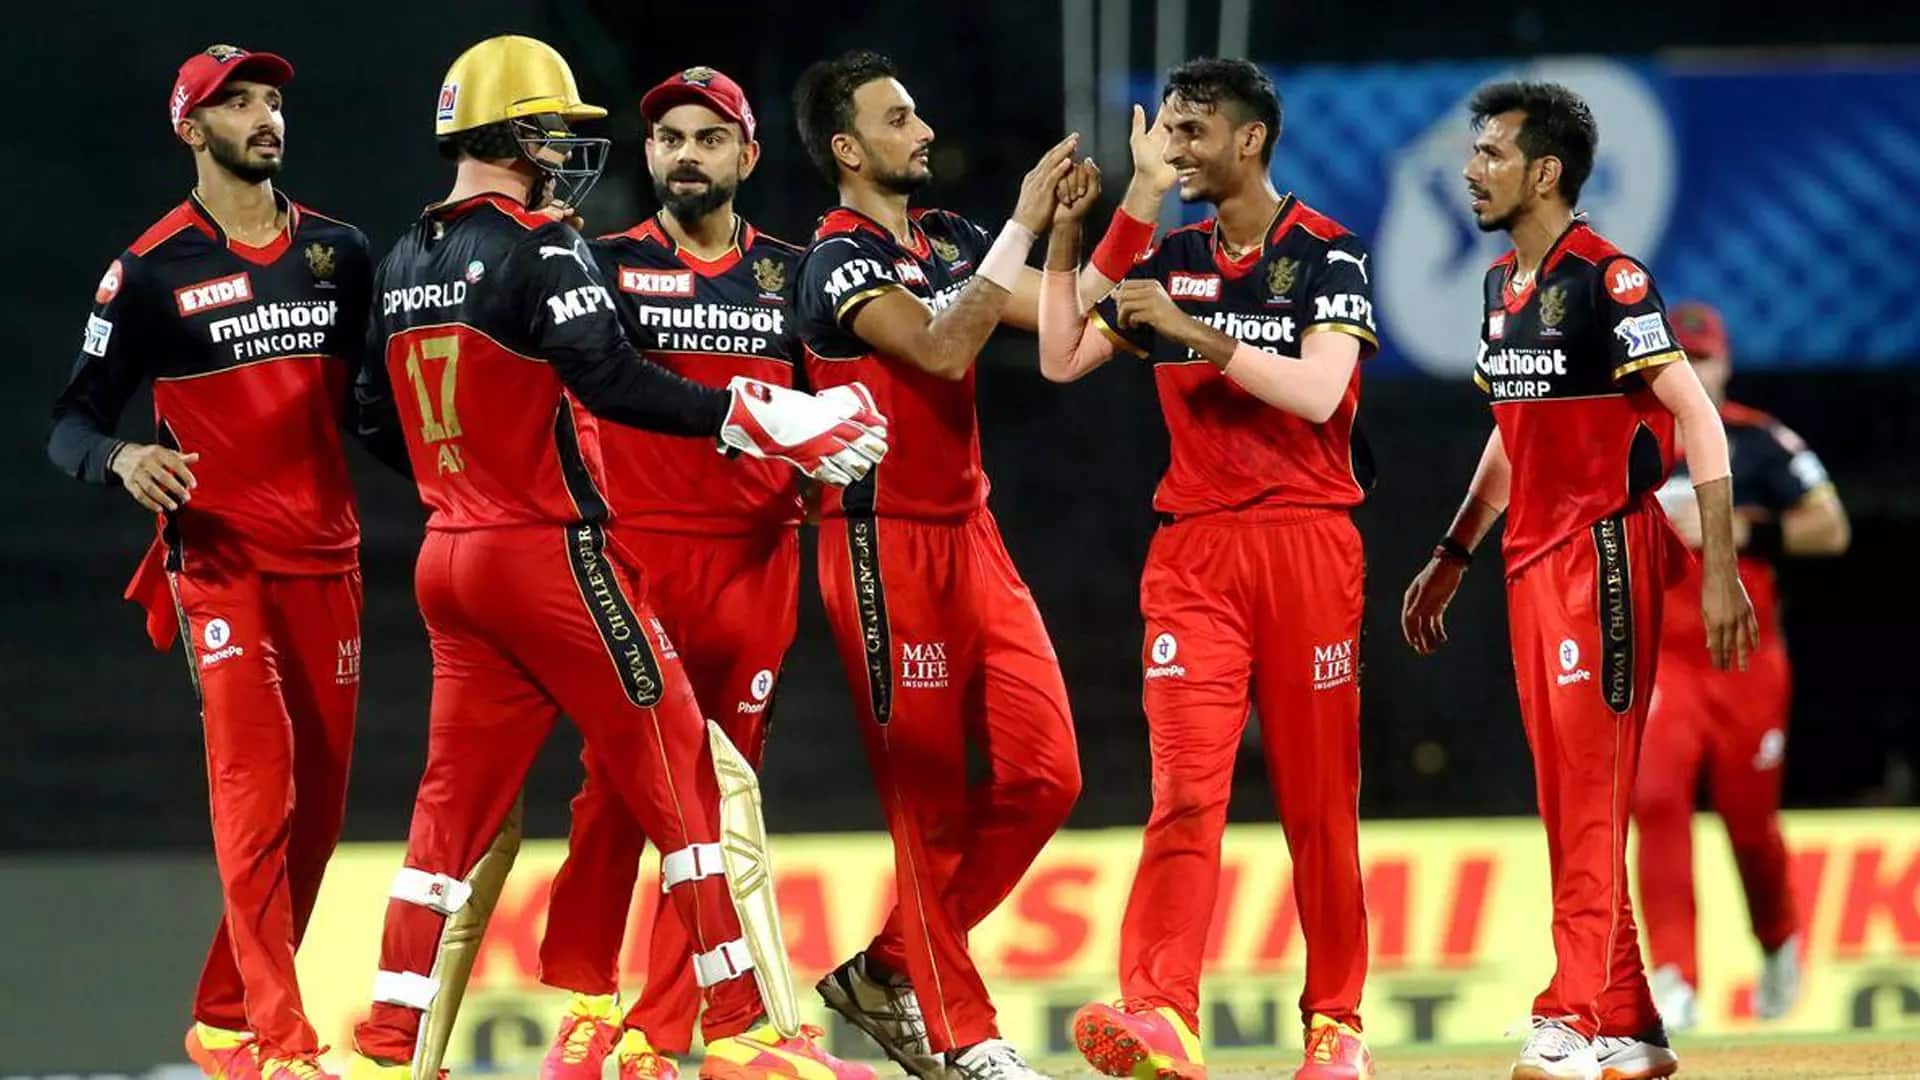 Royal Challengers Bangalore will be known as Royal Challengers Bengaluru | Source: X.com